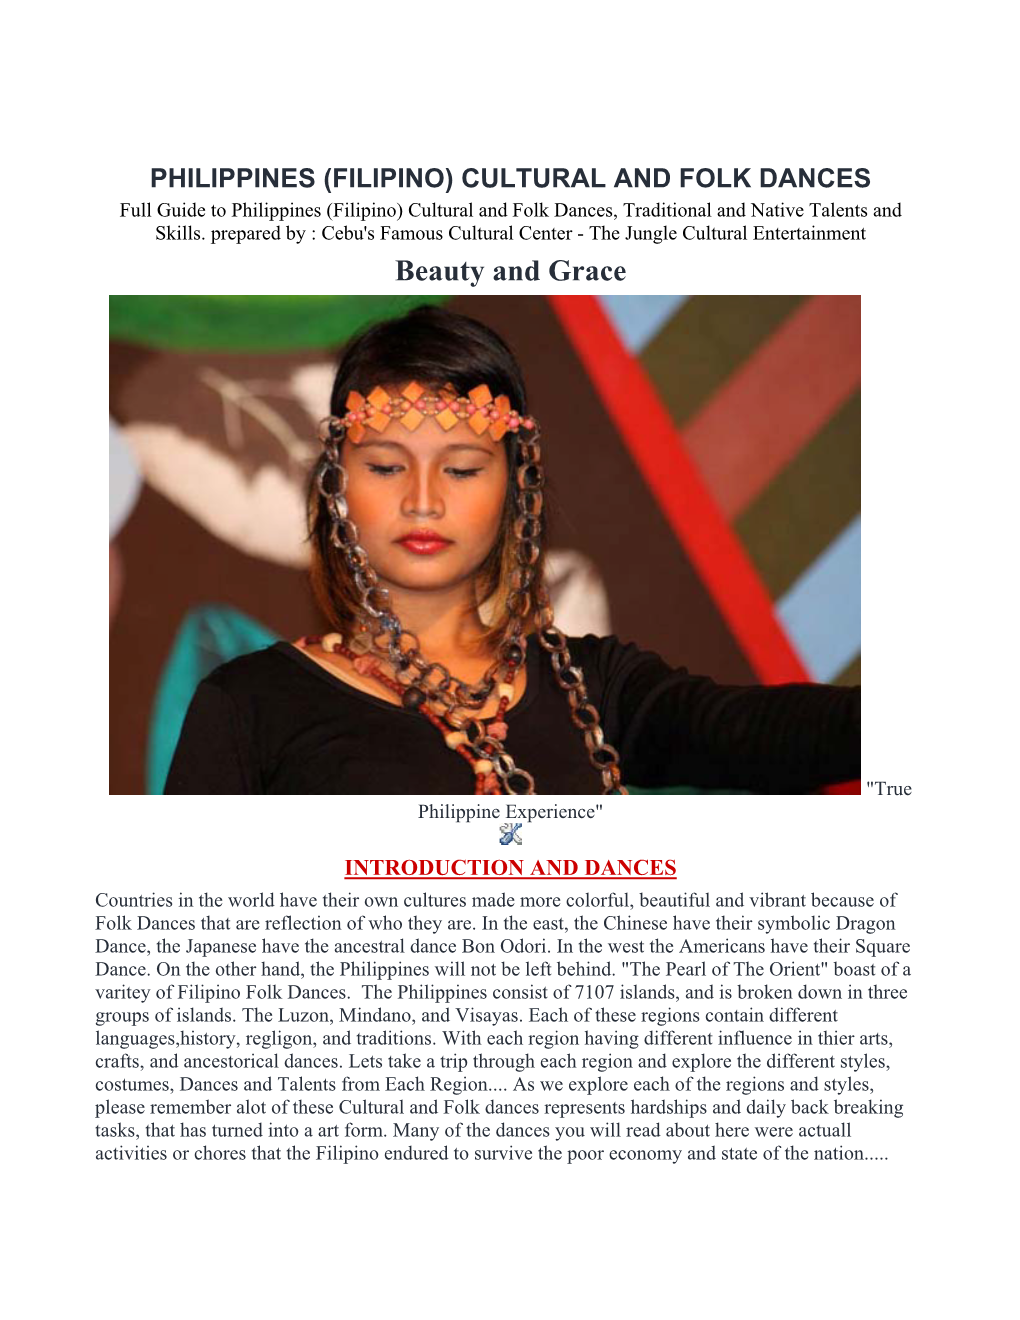 PHILIPPINES (FILIPINO) CULTURAL and FOLK DANCES Full Guide to Philippines (Filipino) Cultural and Folk Dances, Traditional and Native Talents and Skills